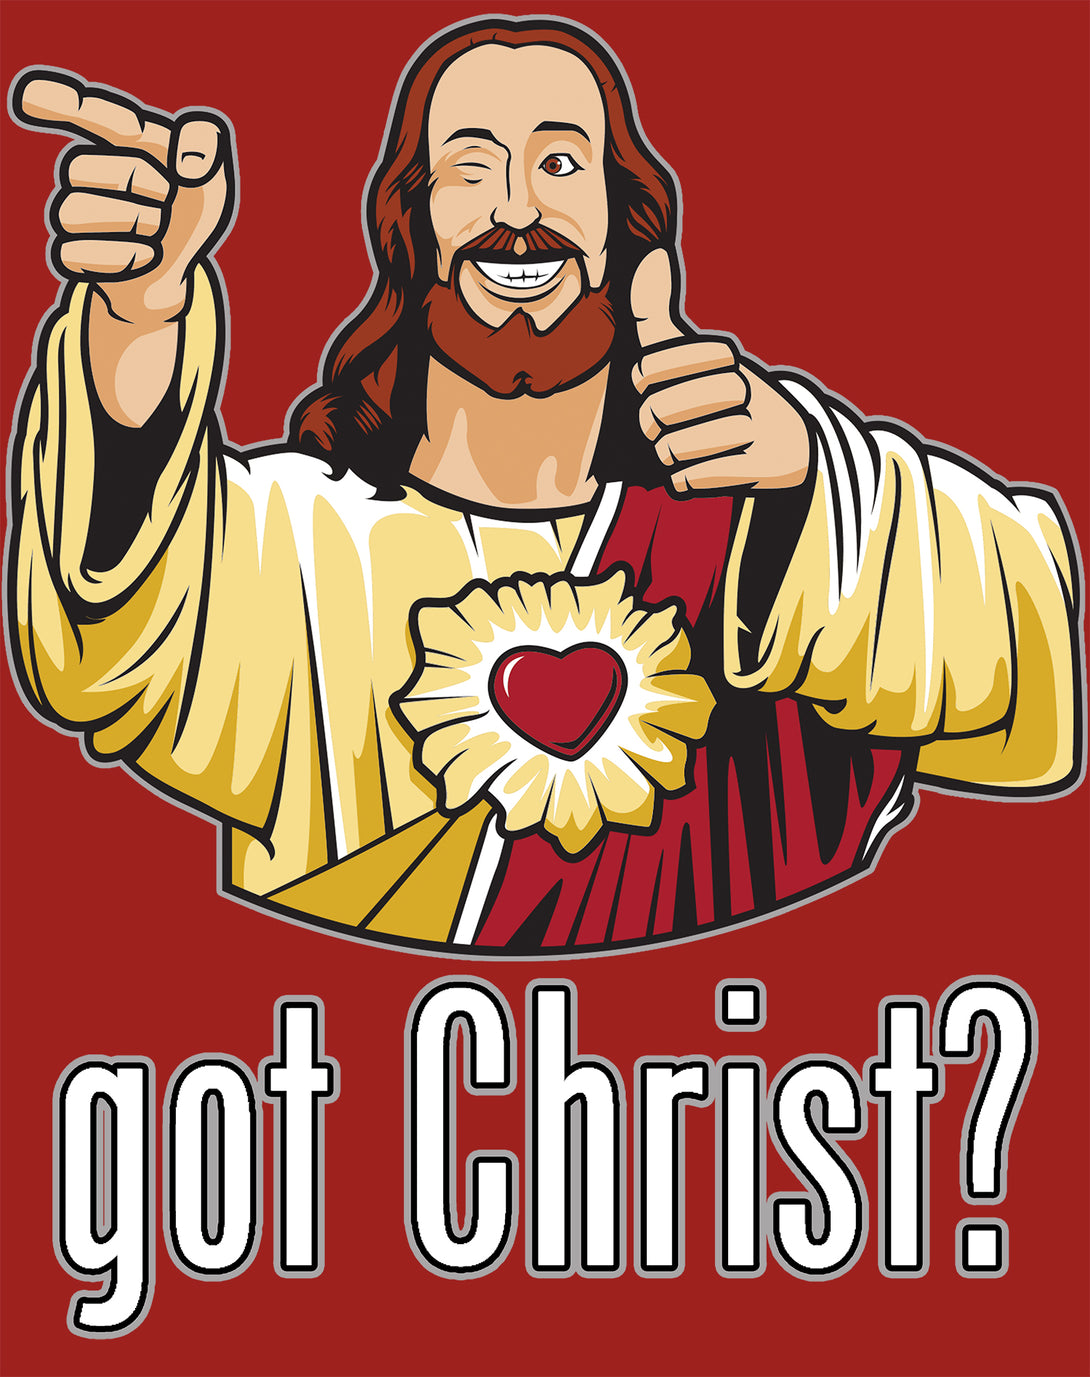 Kevin Smith View Askewniverse Buddy Christ Got FInger Guns Classic Official Men's T-Shirt Red - Urban Species Design Close Up